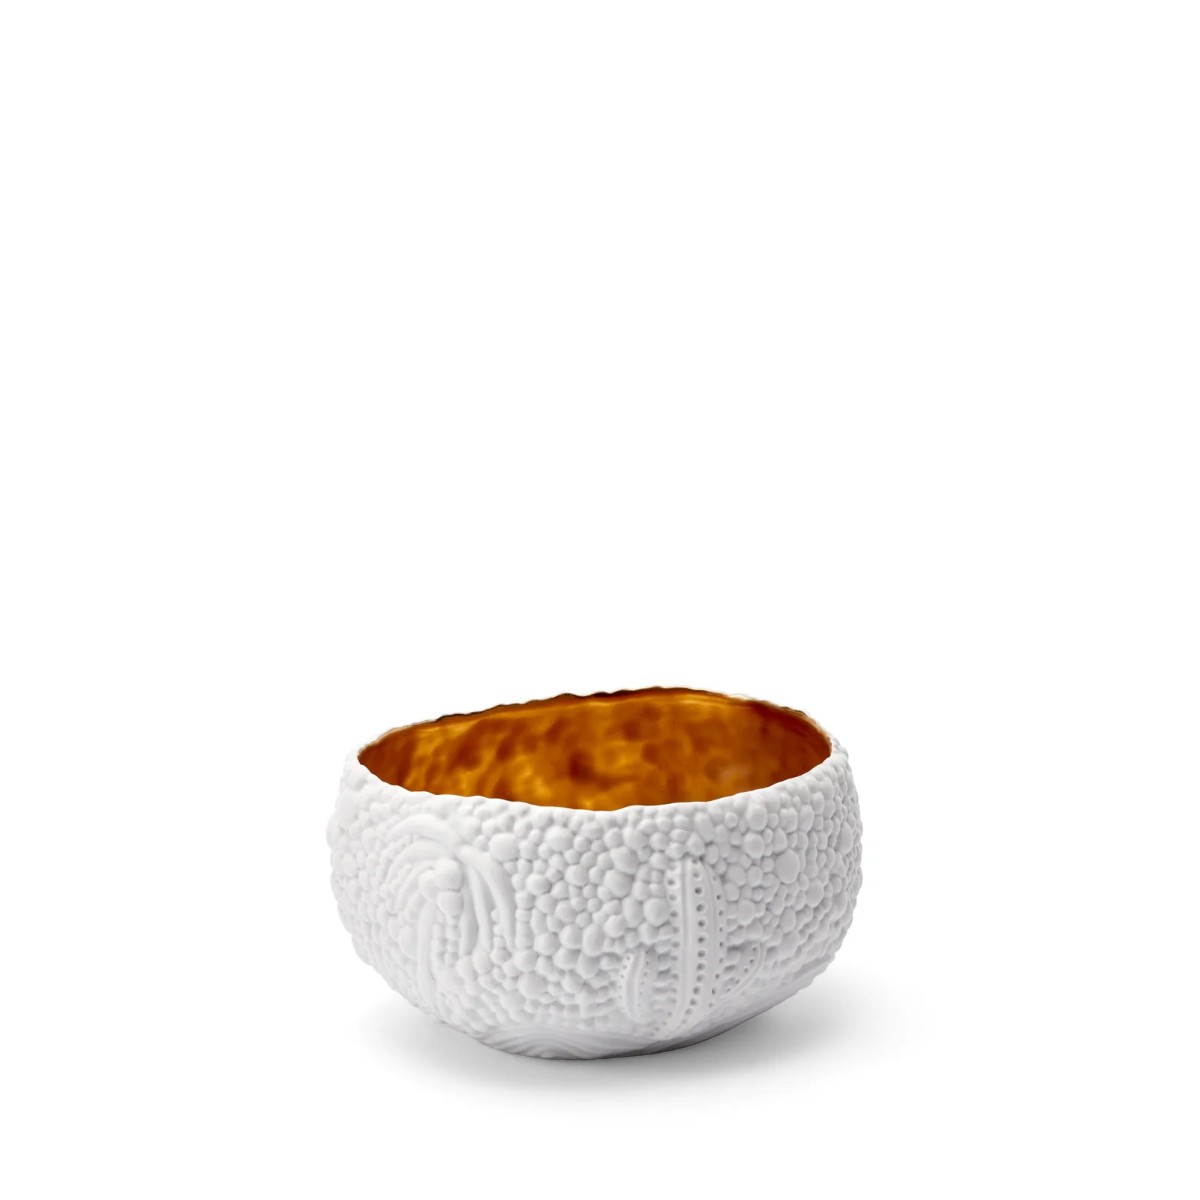 L’Objet | Haas Mojave Desert Bowl - Small | White and Gold